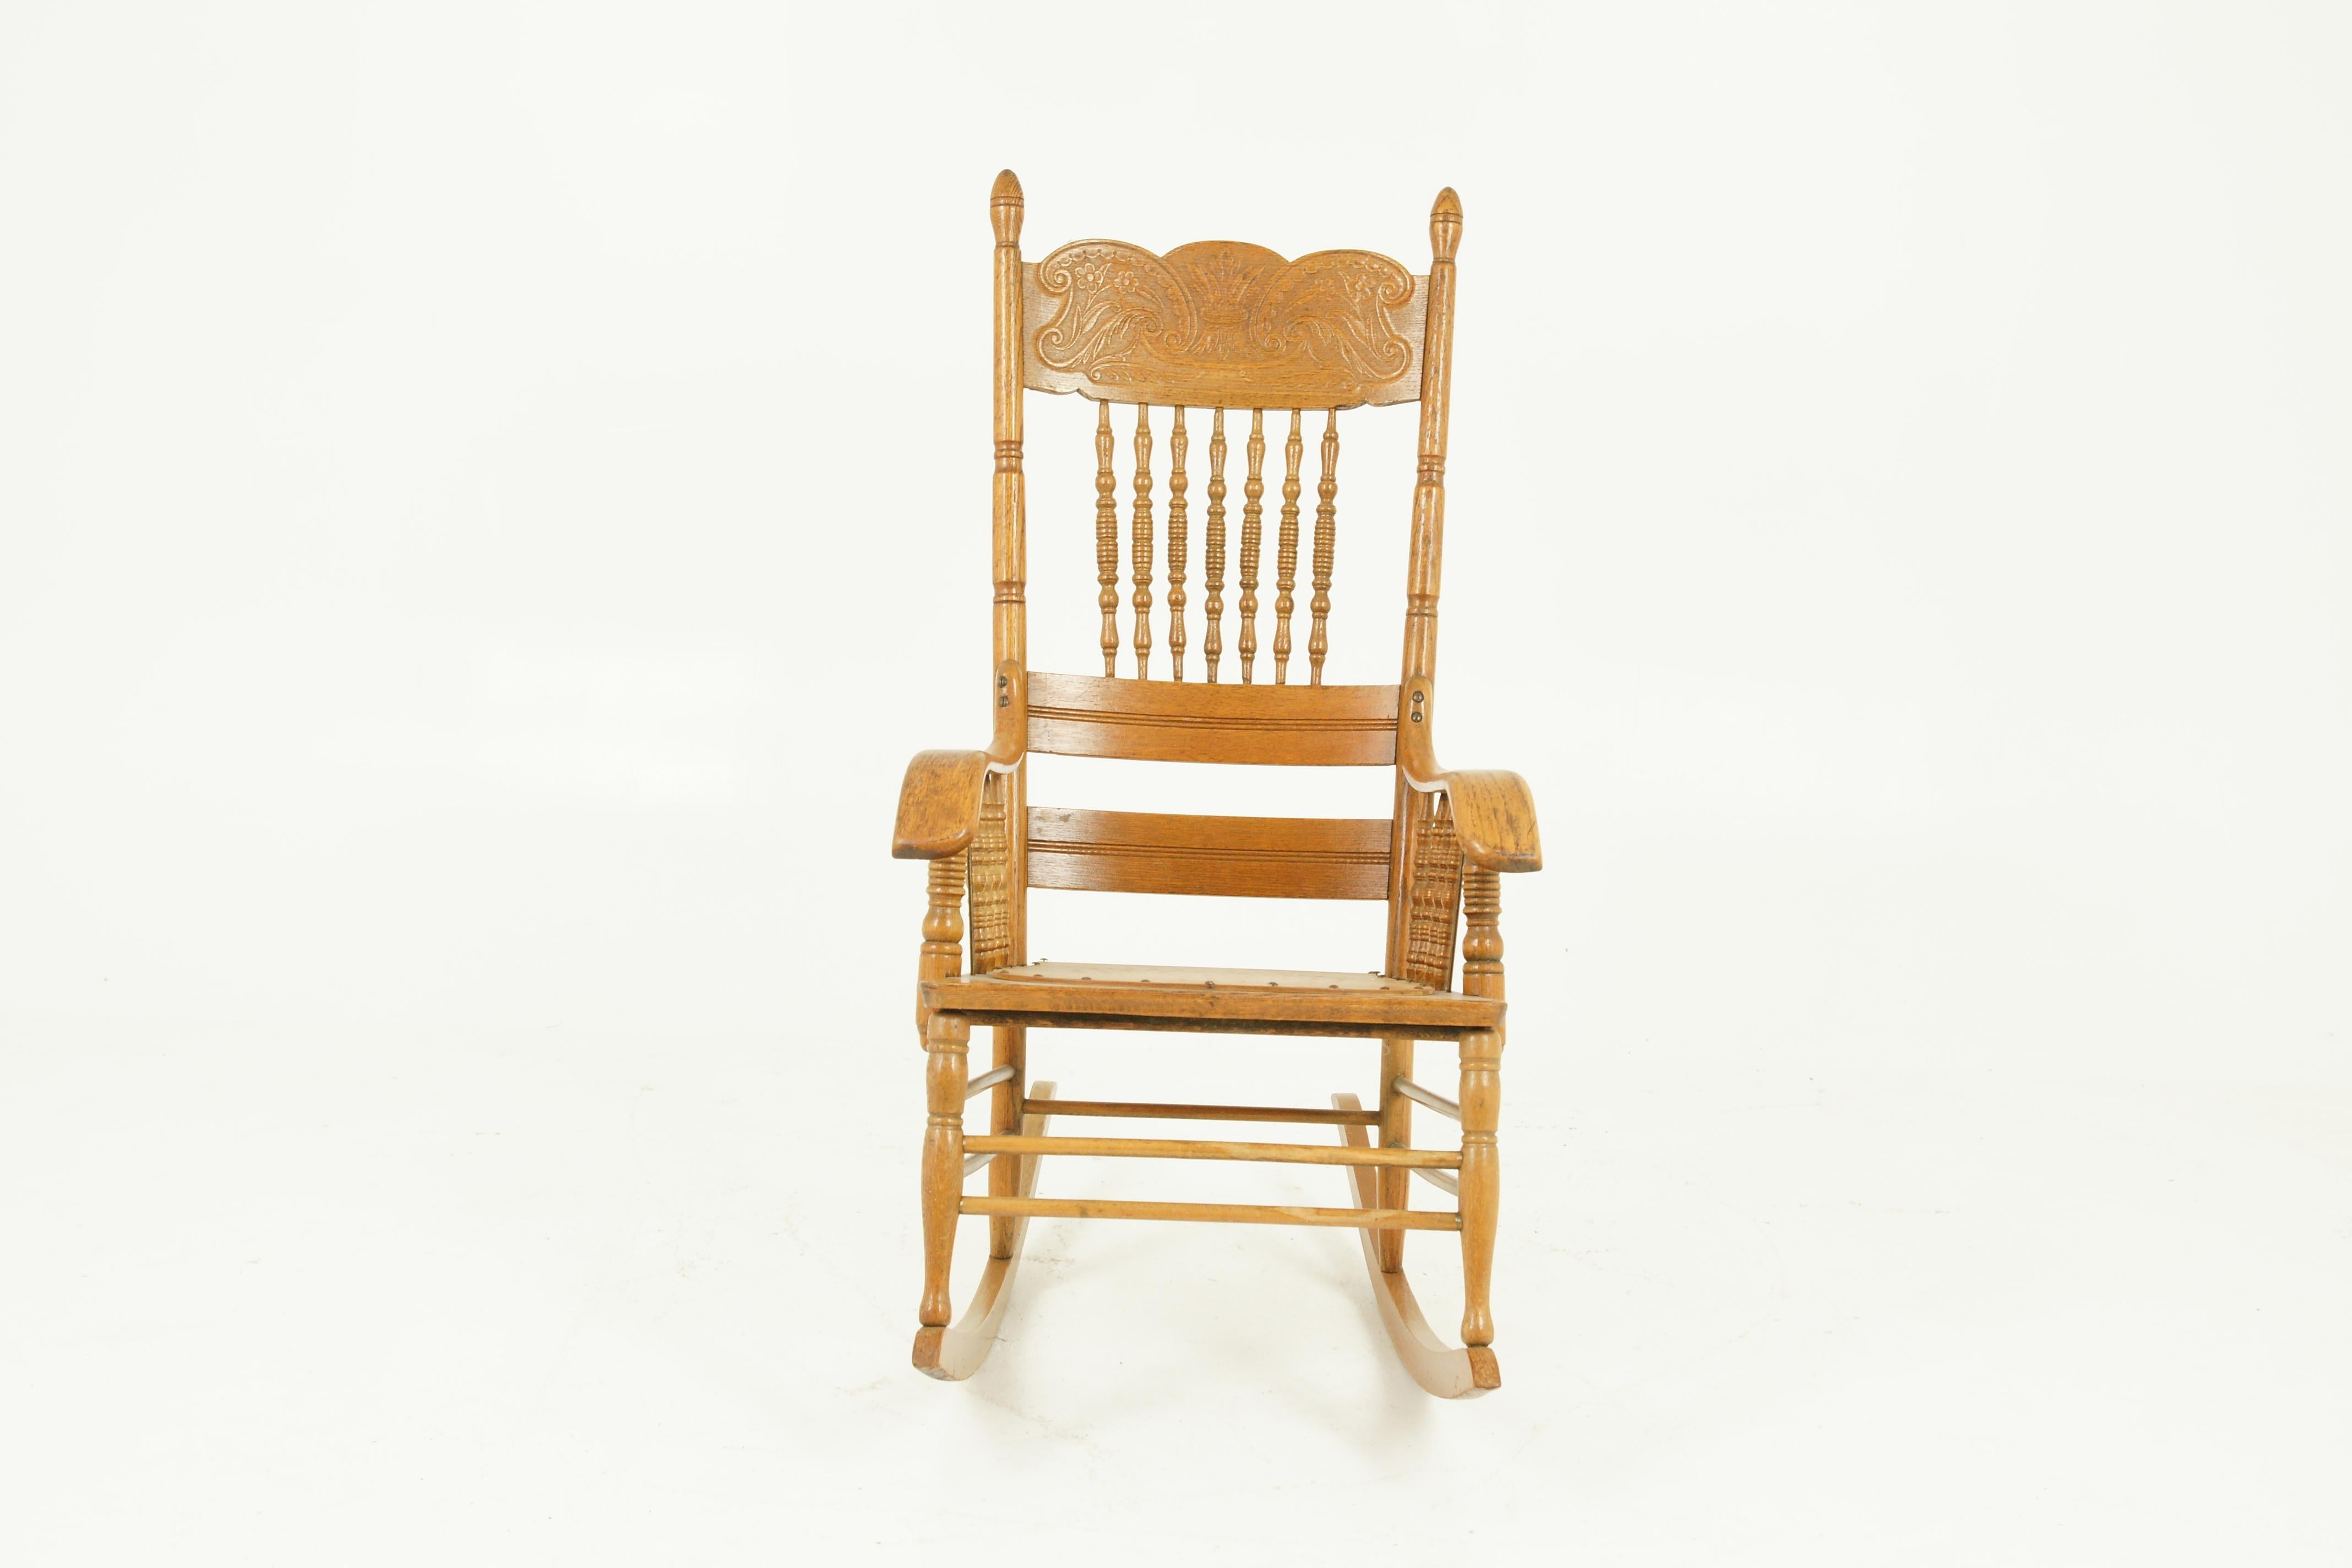 Antique rocking chair, spindle pressed back, carved oak, America, 1910, antique furniture, BCon2

America, 1910
Solid oak construction
Tall turned supports to the back
Carved pressed back to the top
Seven turned spindles below
Outswept bentwood